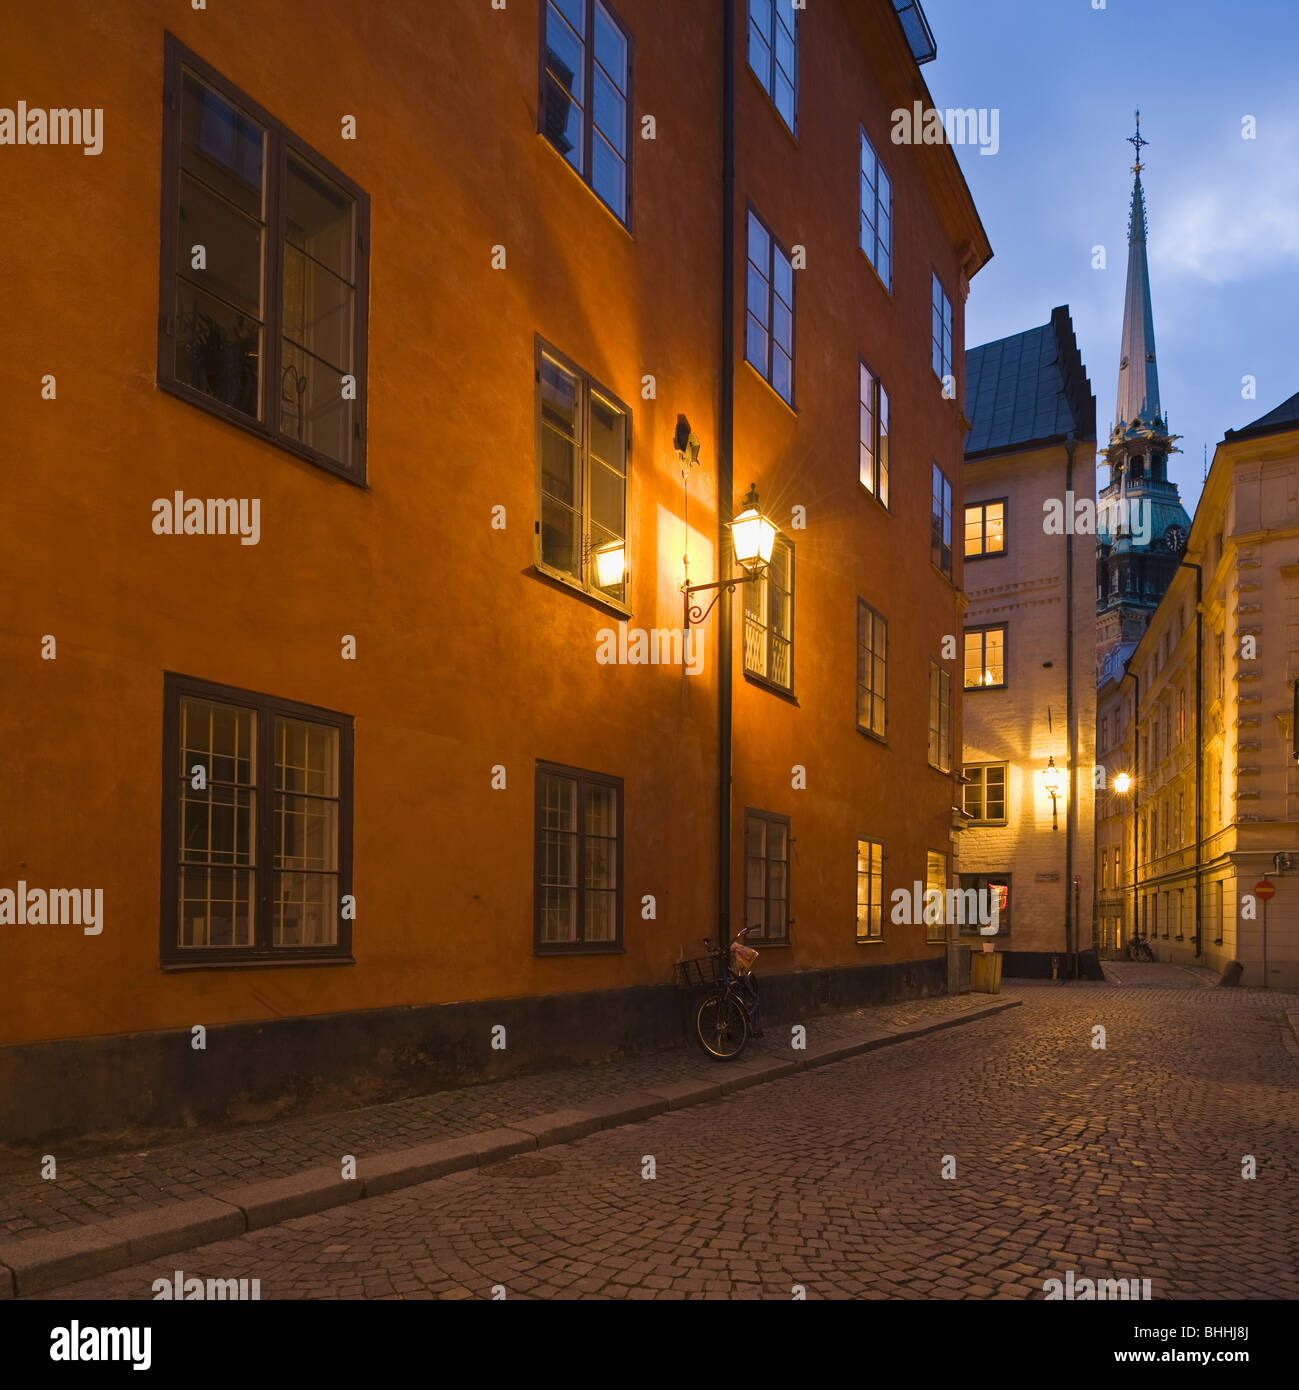 Cobble stone street of old town - gamla stan, Stockholm, Sweden Stock Photo